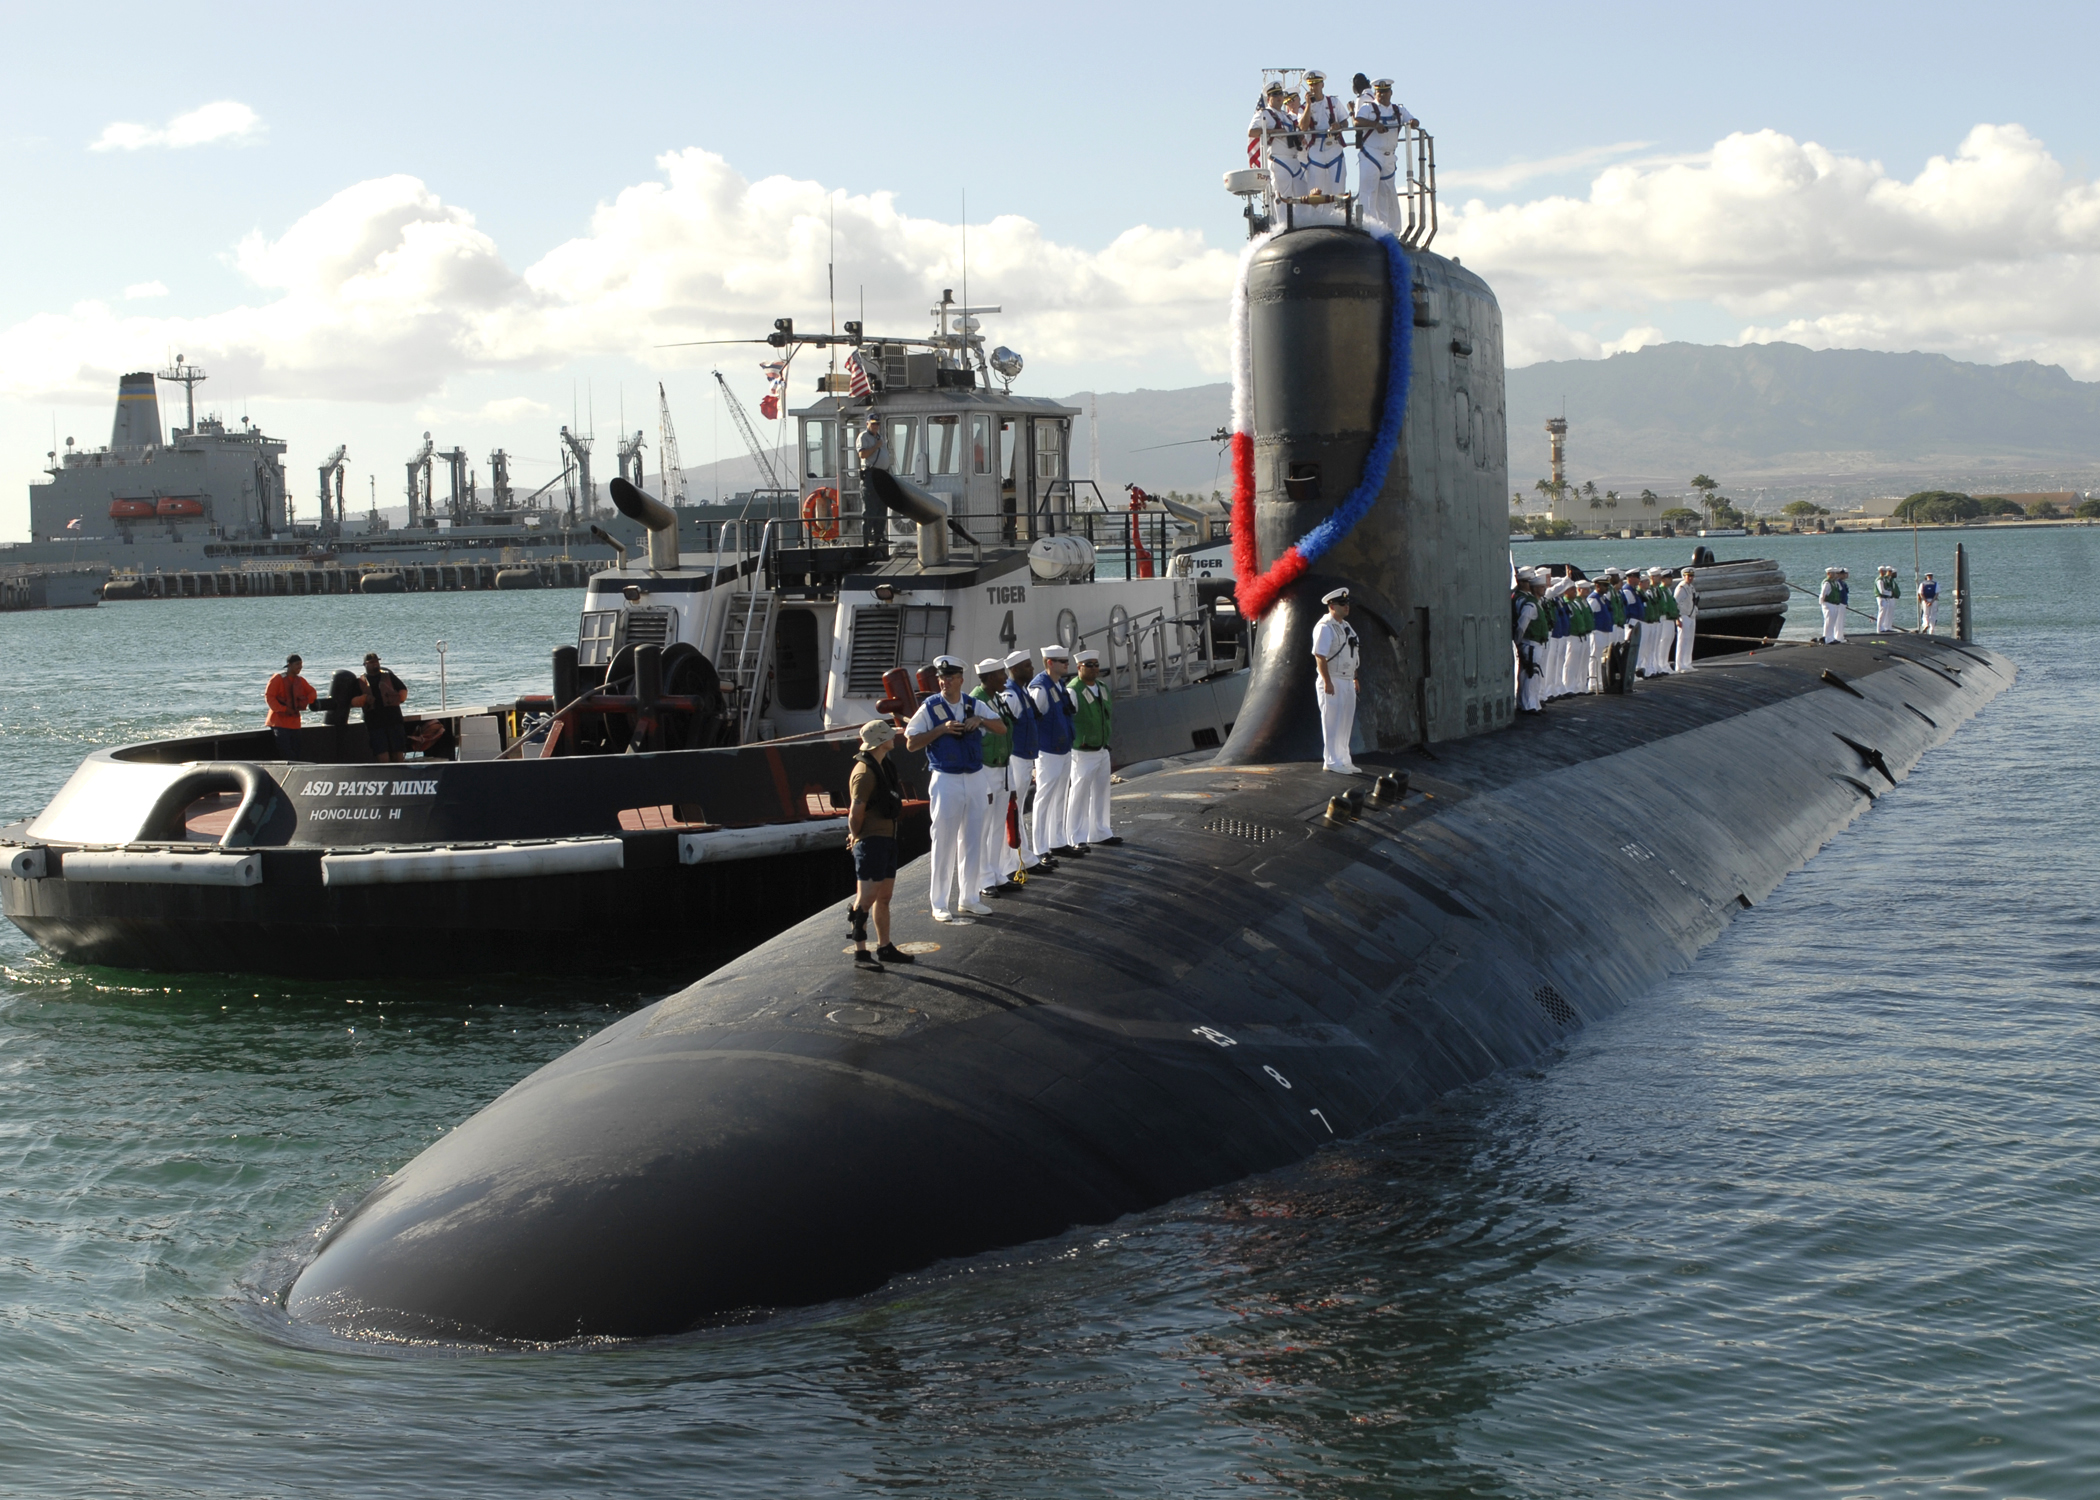 http://upload.wikimedia.org/wikipedia/commons/b/b4/US_Navy_091123-N-5212T-016_USS_Texas_(SSN_775)_arrived_at_its_new_home_port,_Naval_Station_Pearl_Harbor.jpg